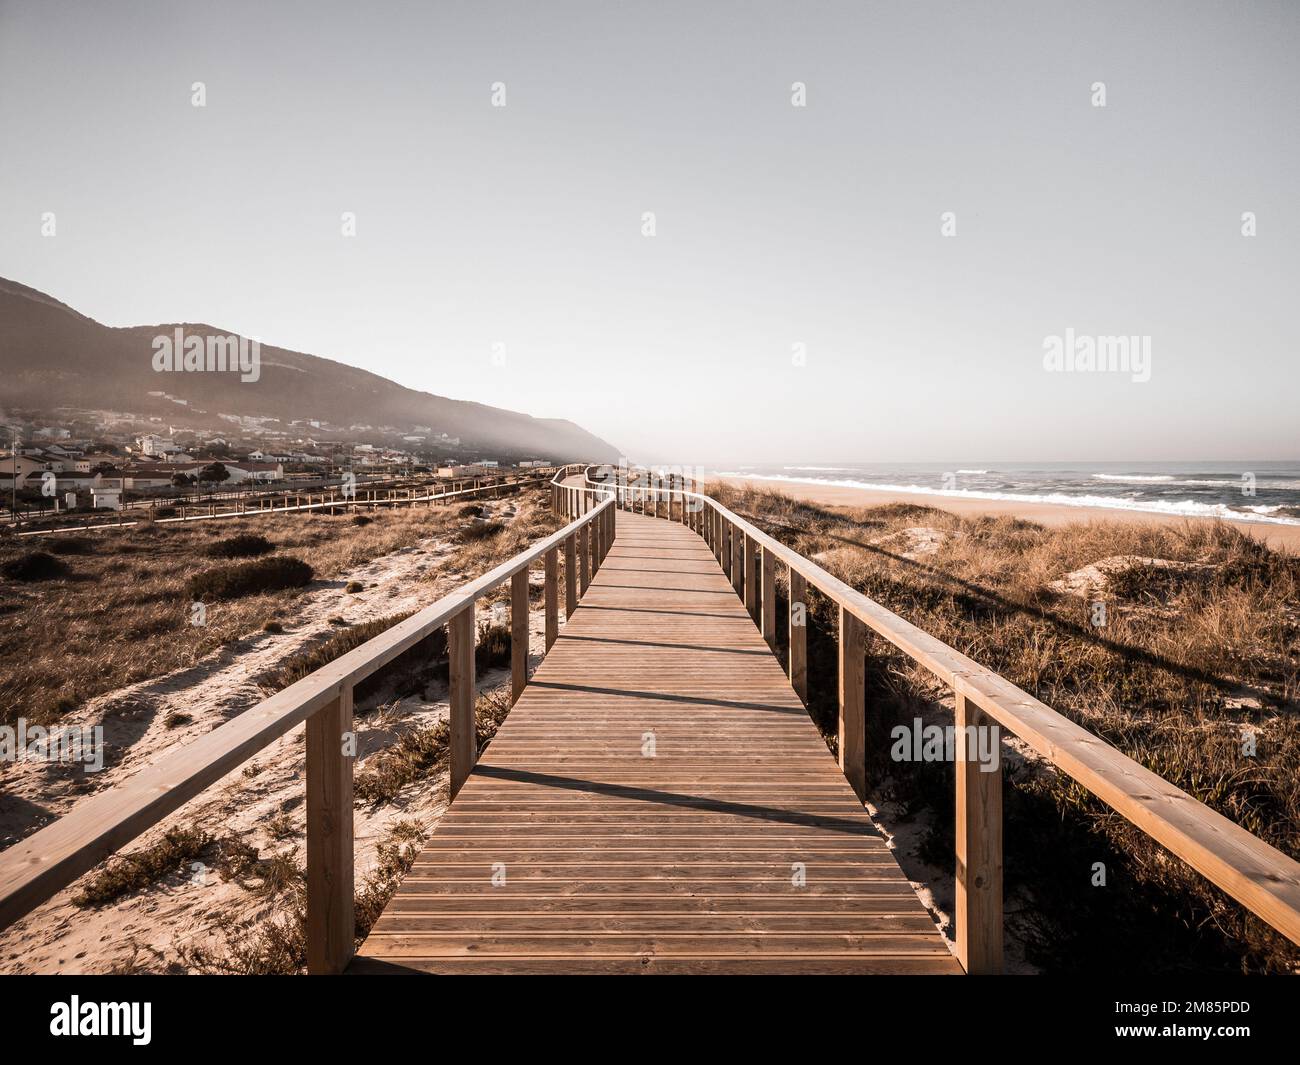 A long boardwalk on a grassy sand dune along the beach leading to the mountain with desaturated colors. The way ahead concept. Quiaios Beach, Portugal Stock Photo